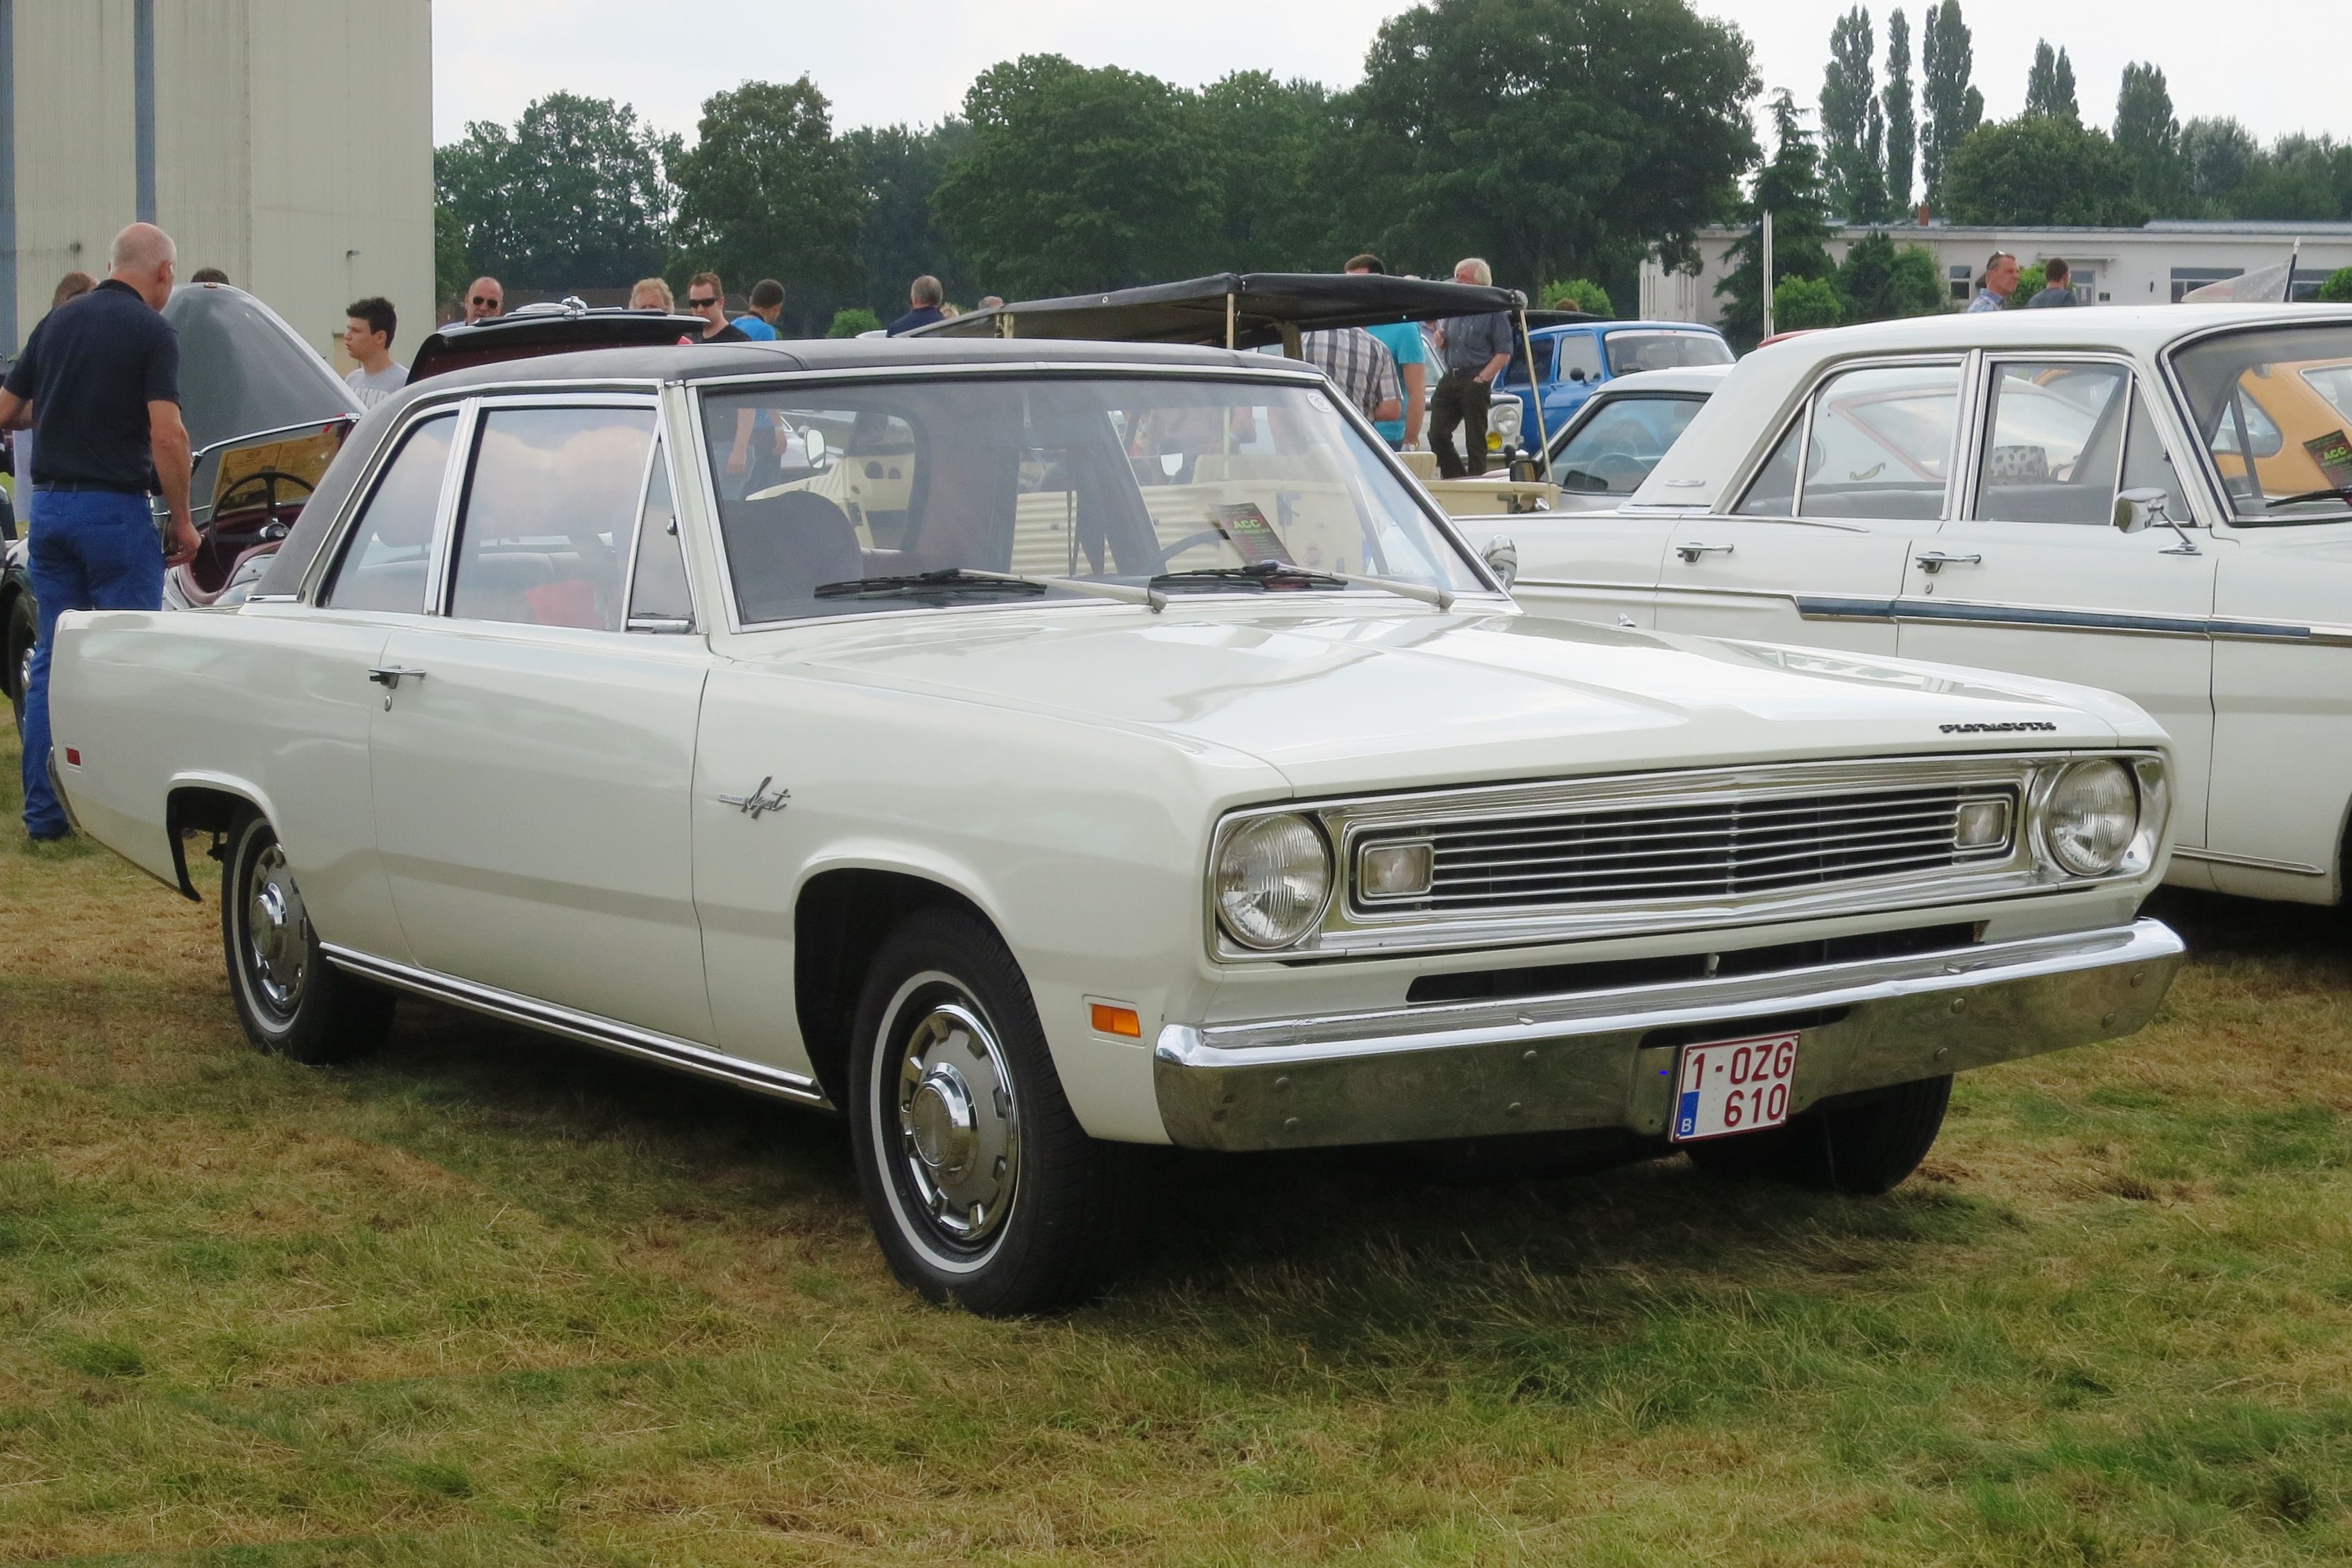 White Plymouth Valiant outdoors